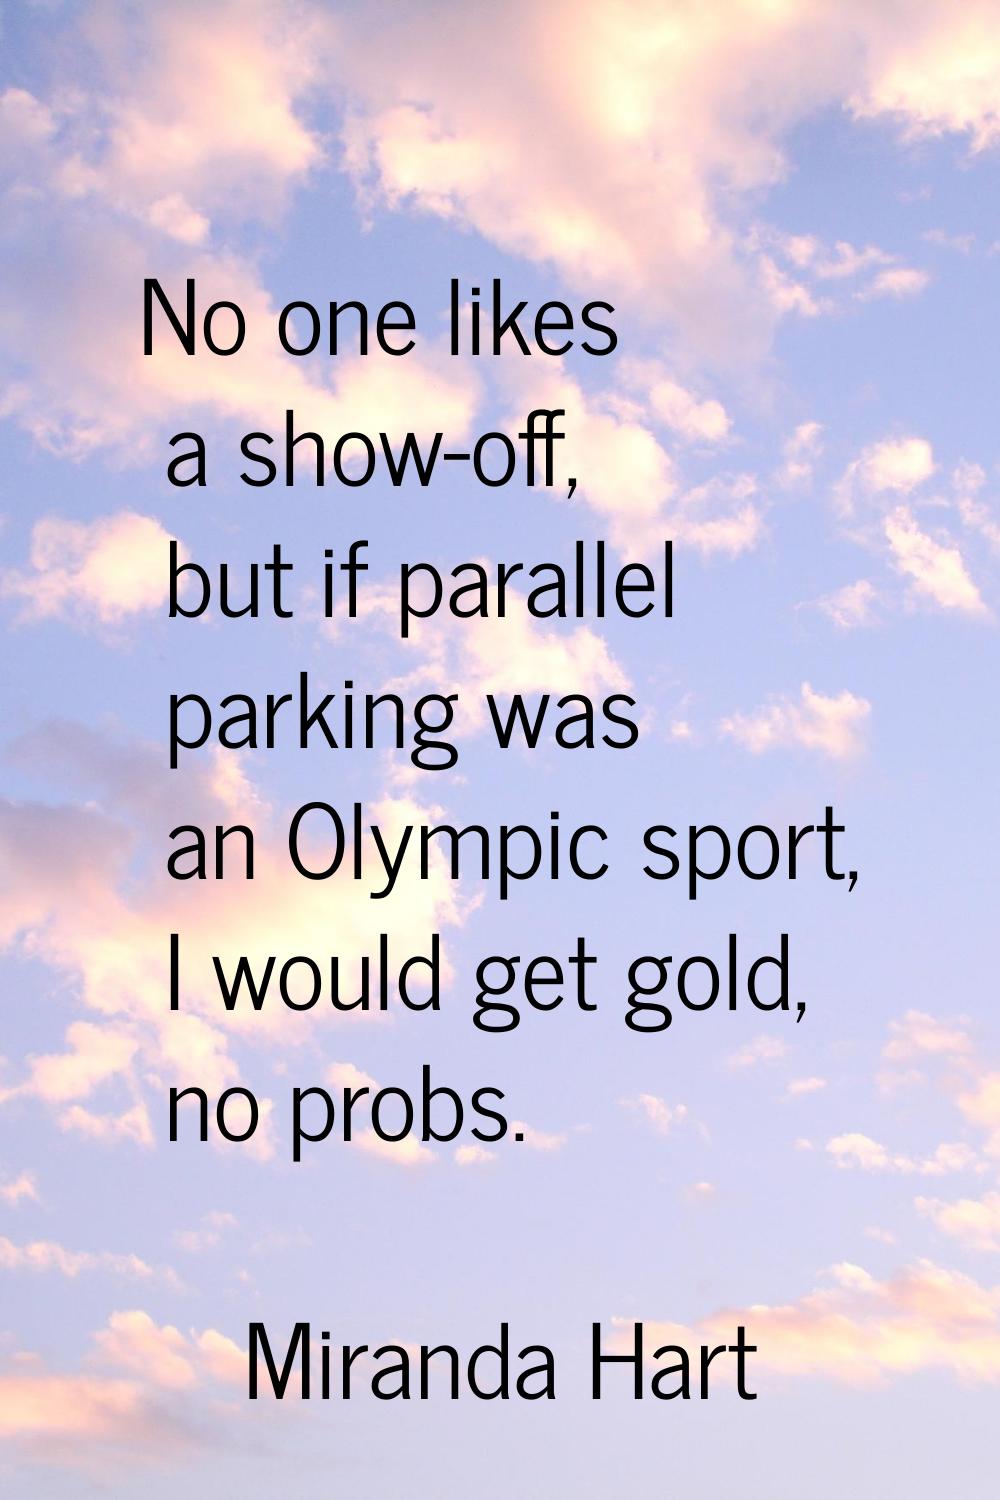 No one likes a show-off, but if parallel parking was an Olympic sport, I would get gold, no probs.